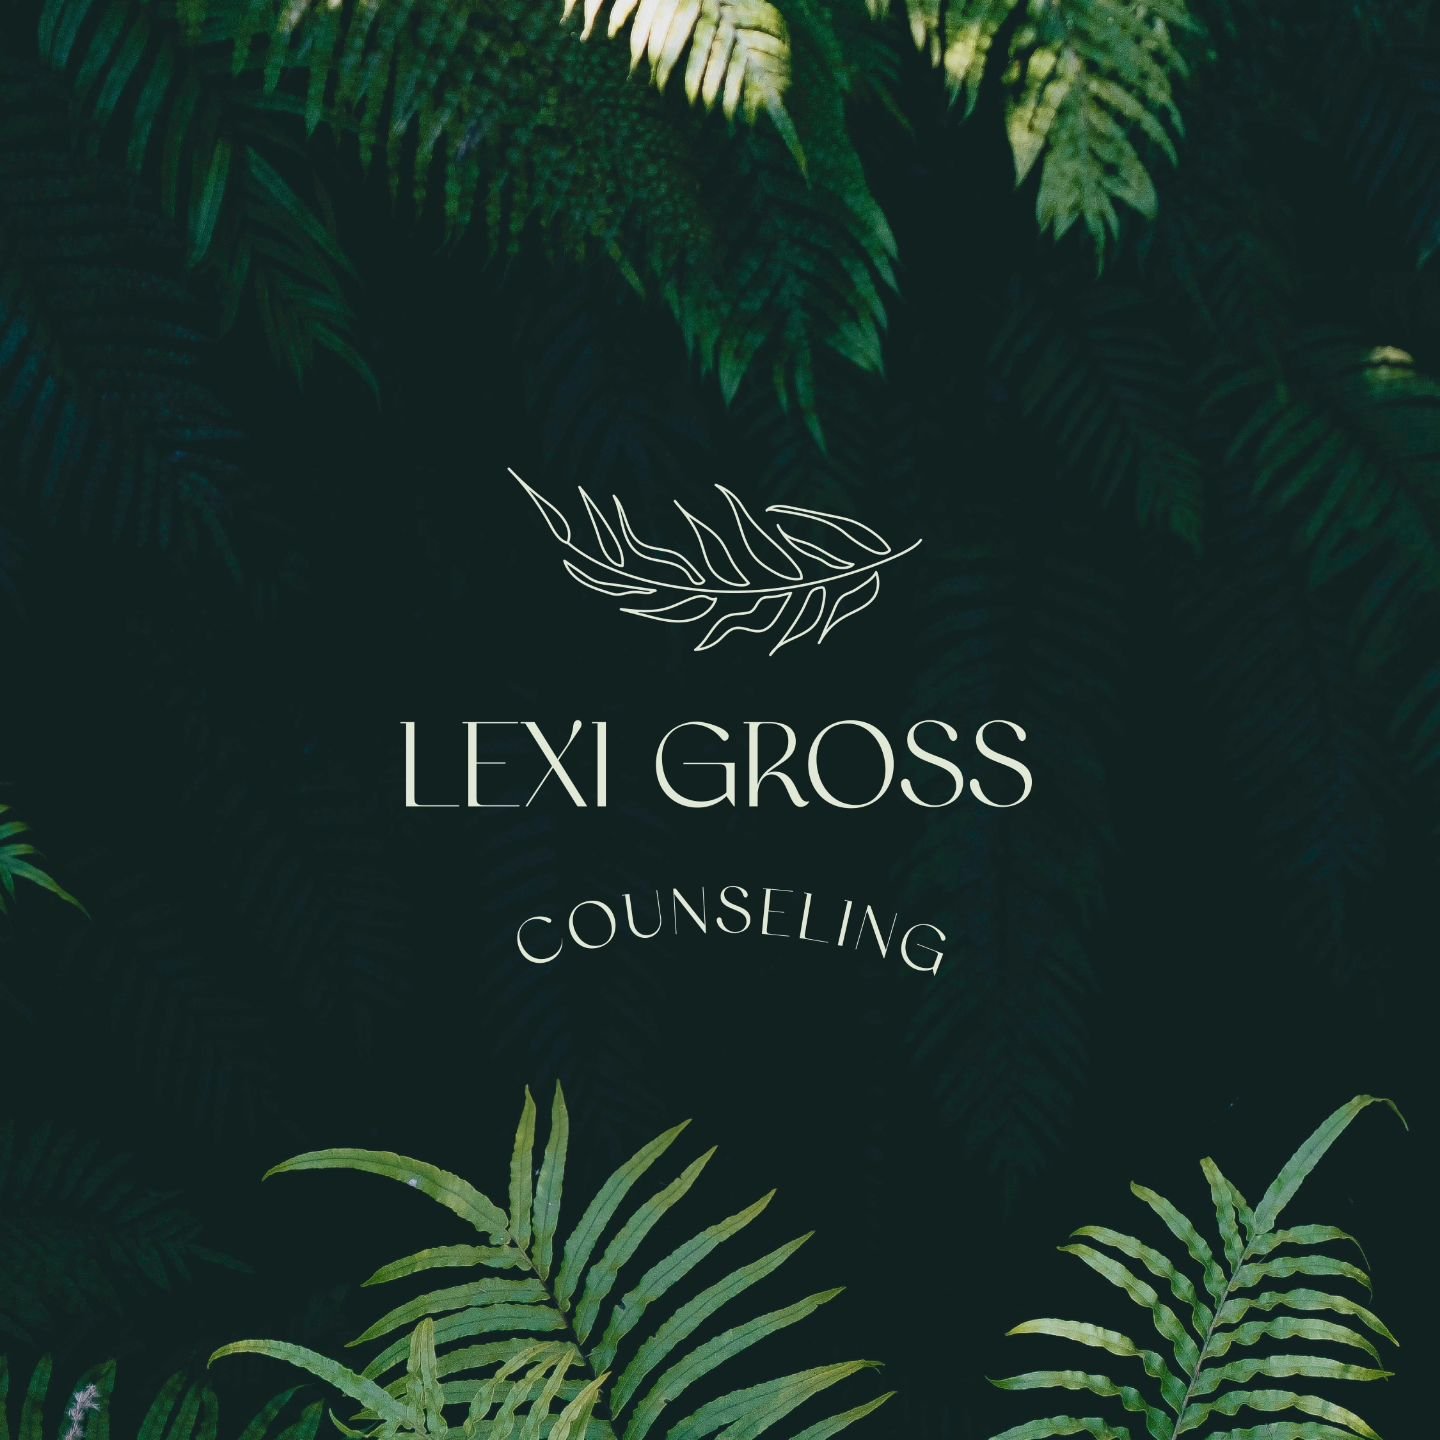 Lexi Gross is an amazing somatic therapist specializing in therapy for chronic illness, burnout, and trauma. It was important to center this somatic connection between the mind and body &ndash; as well as the connection between our bodies and nature 